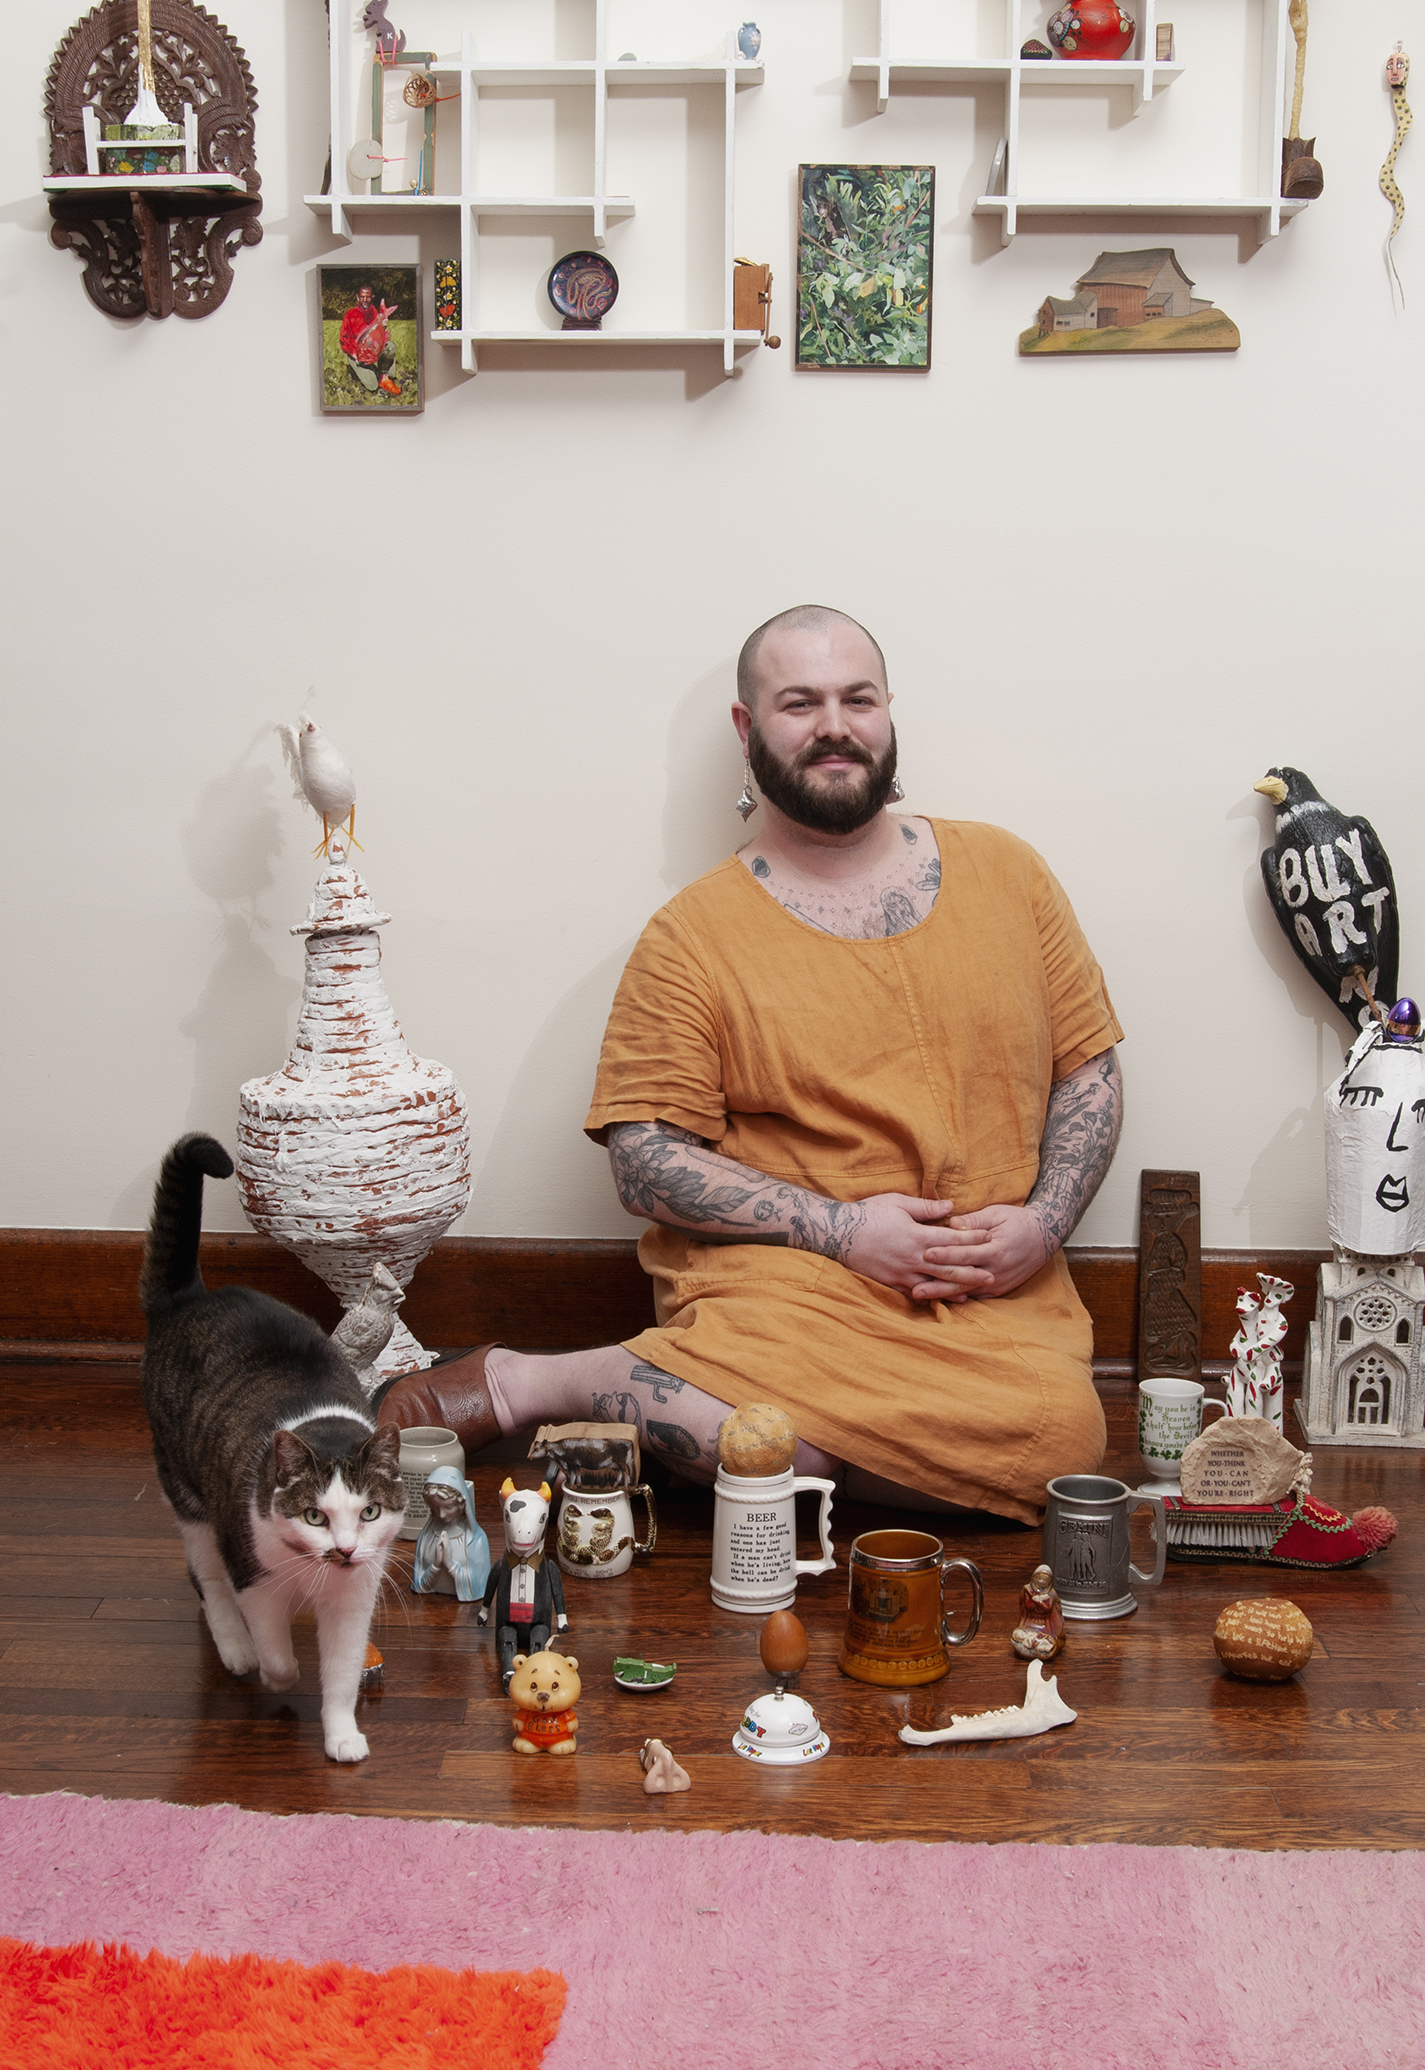 A bearded person sitting of the floor of their room surrounded by objects and shelves above, and a tabby cat.